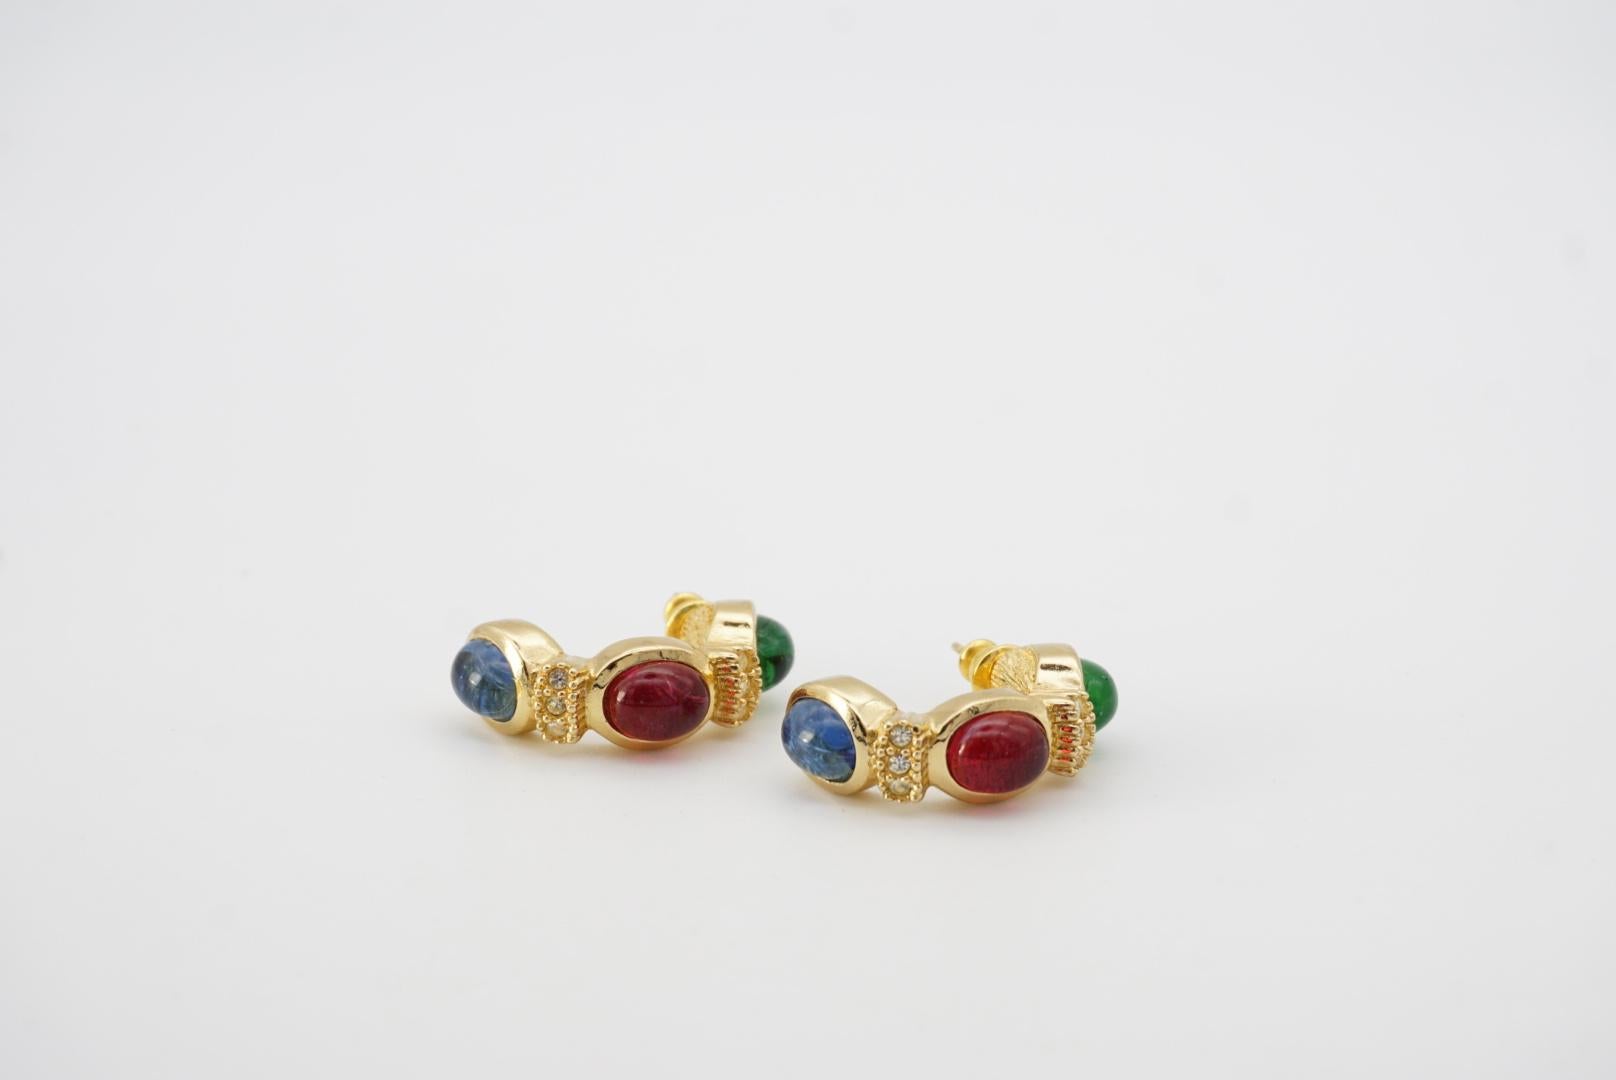 Christian Dior Vintage 1980s Sapphire Ruby Emerald Gripoix Crystal Hoop Earrings For Sale 6